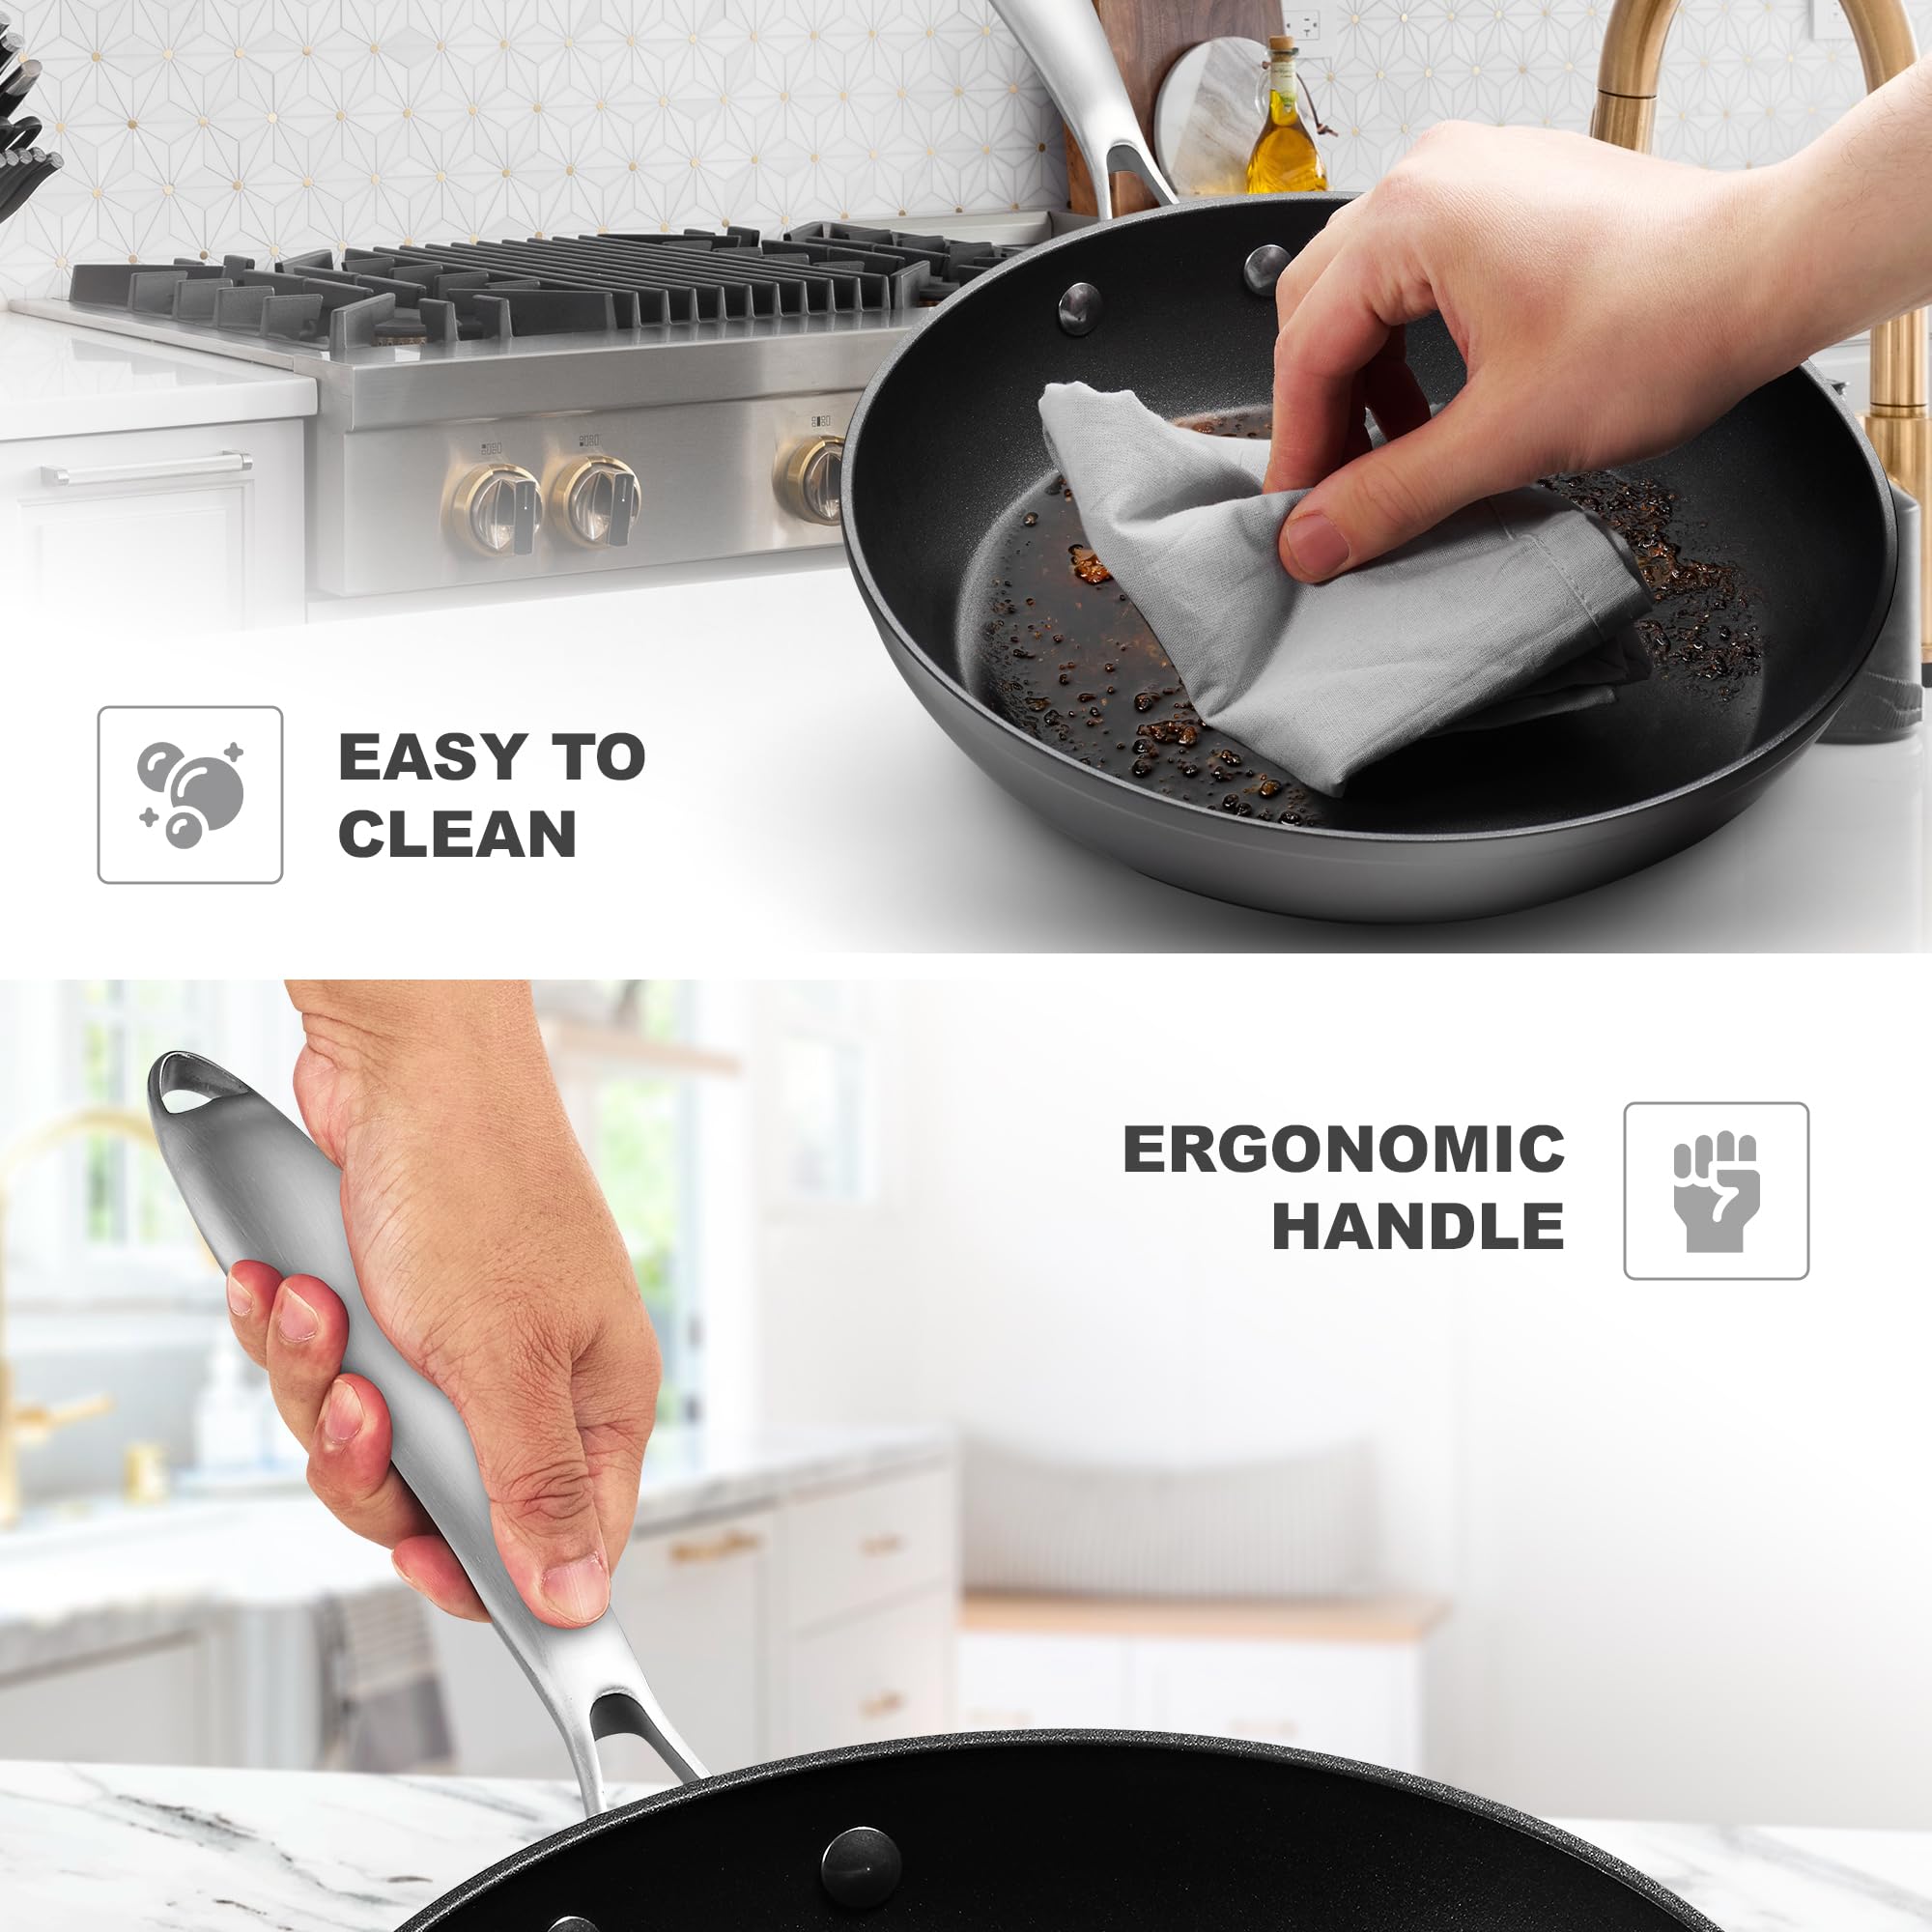 Frying Pans Nonstick - 10" Non Stick Frying Pan with Lid Splatter Screen - Lightweight Aluminum Fry Pan Skillet Includes Spatula - 2" Deep Egg Pan, PFAS-Free and PFOA Free, Dishwasher Safe, Oven Safe  - Very Good